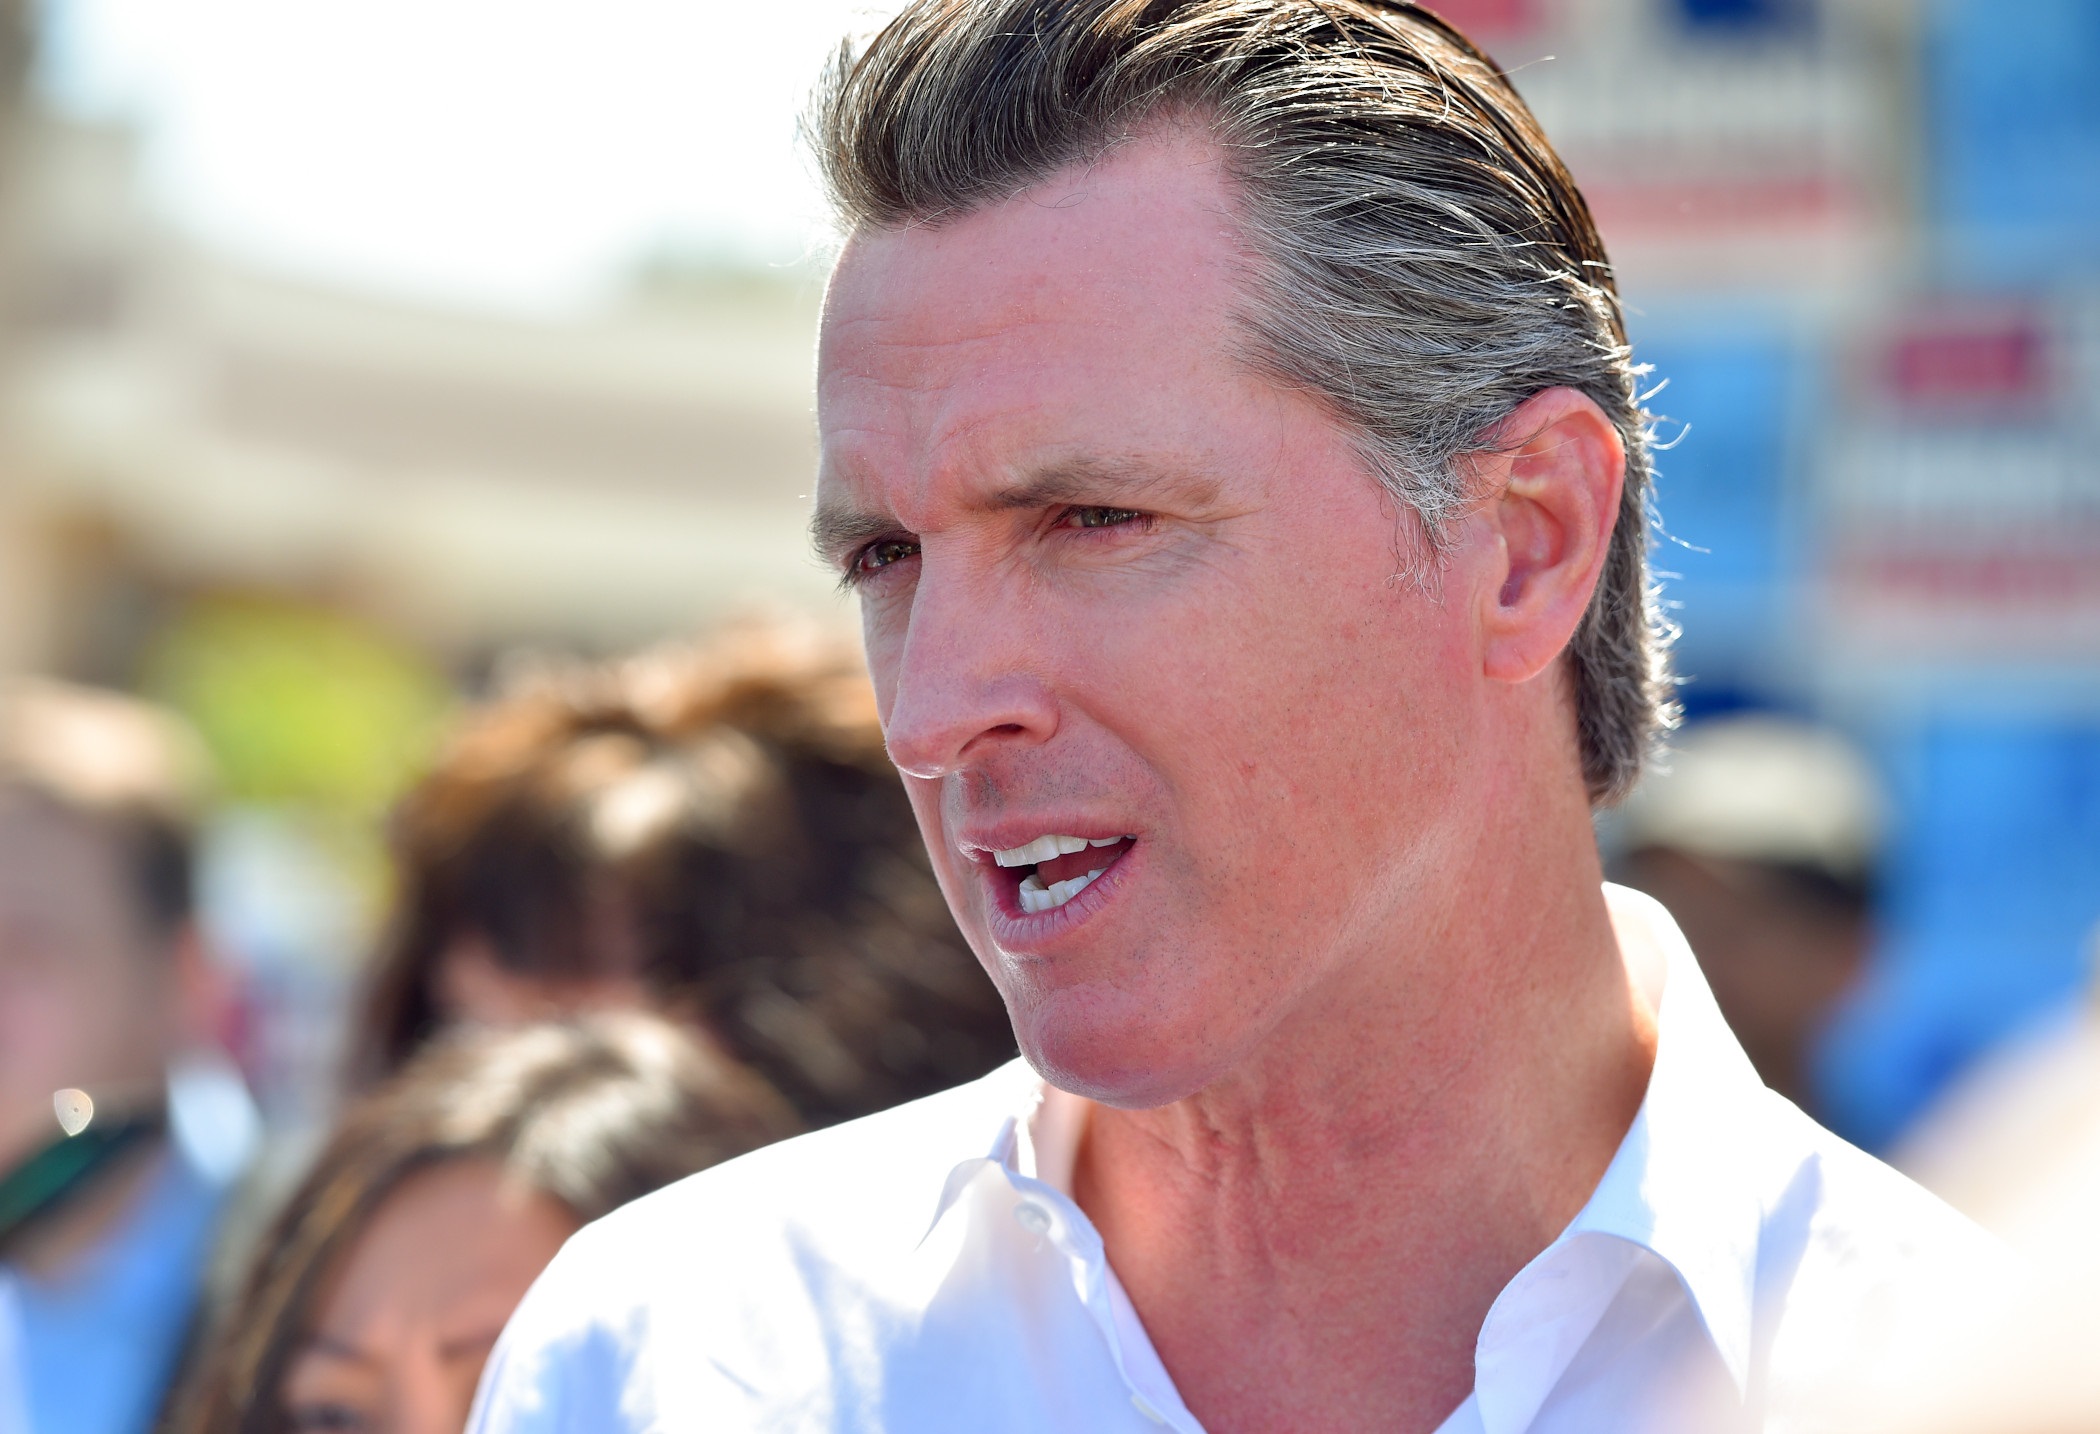 Gov. Gavin Newsom said counties in California are being given more leeway to decide the pace of business openings based on local circumstances, provided they file contingency plans with the state. (Getty Images)